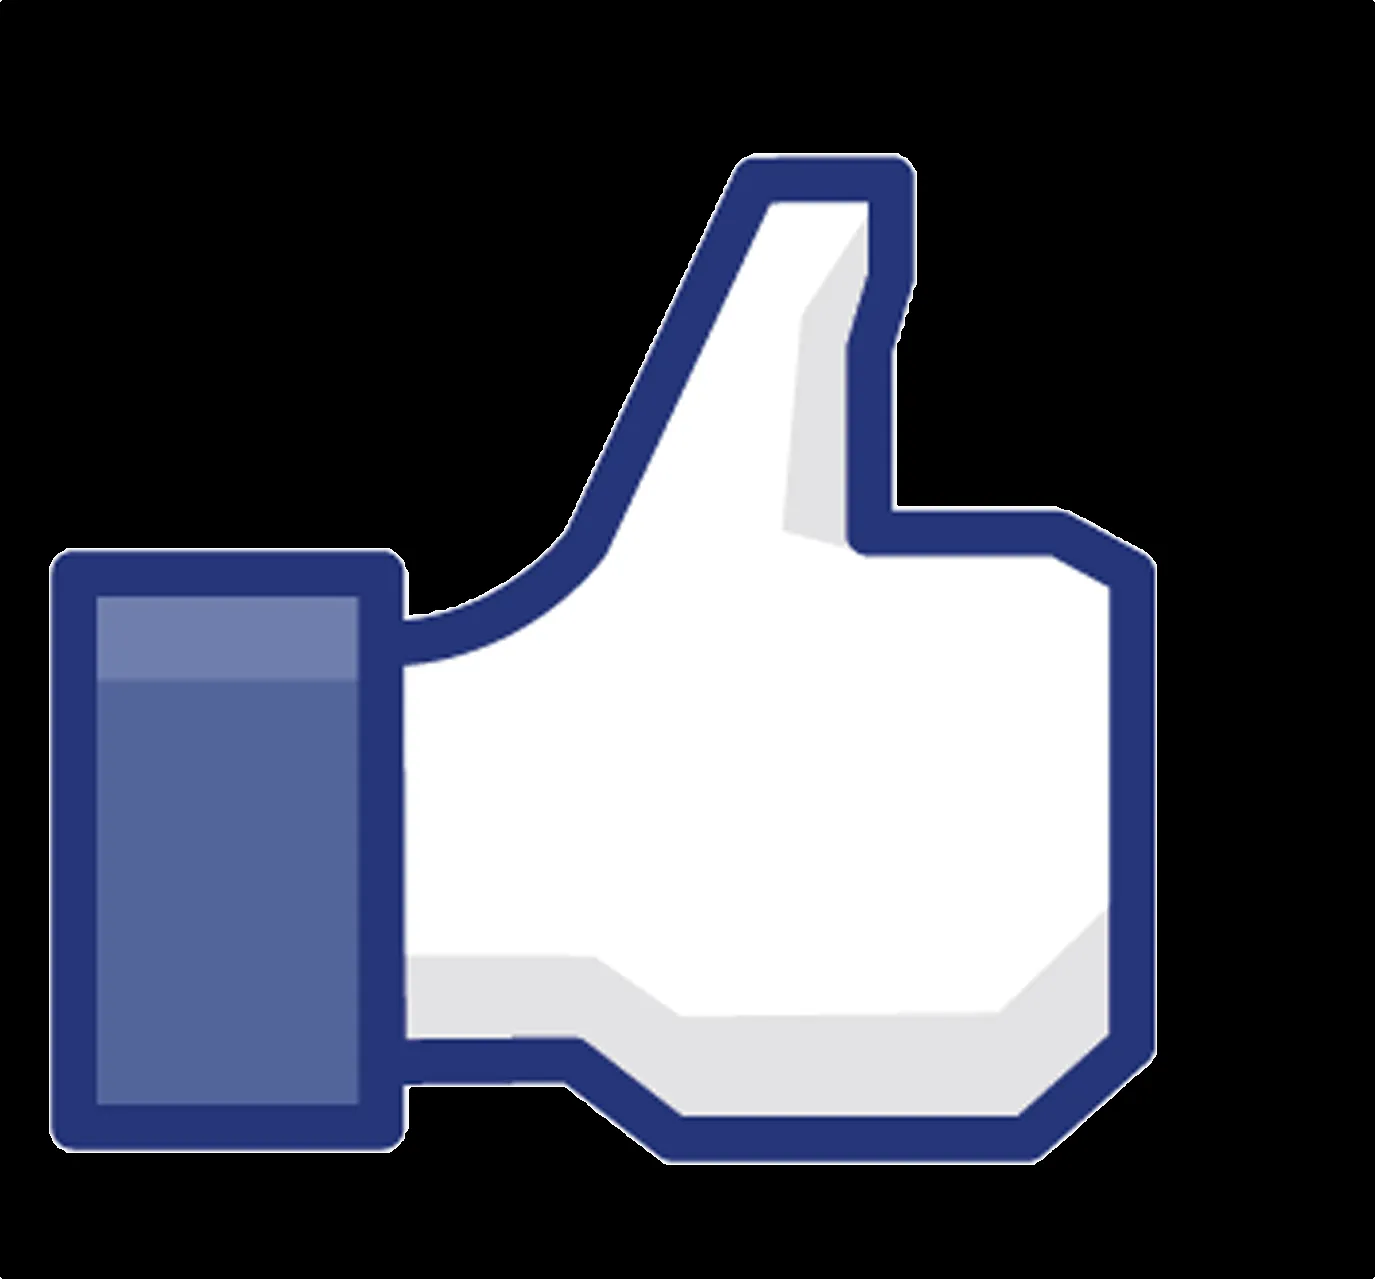 Image - Facebook like buton.png - The Call of Duty Wiki - Black ...